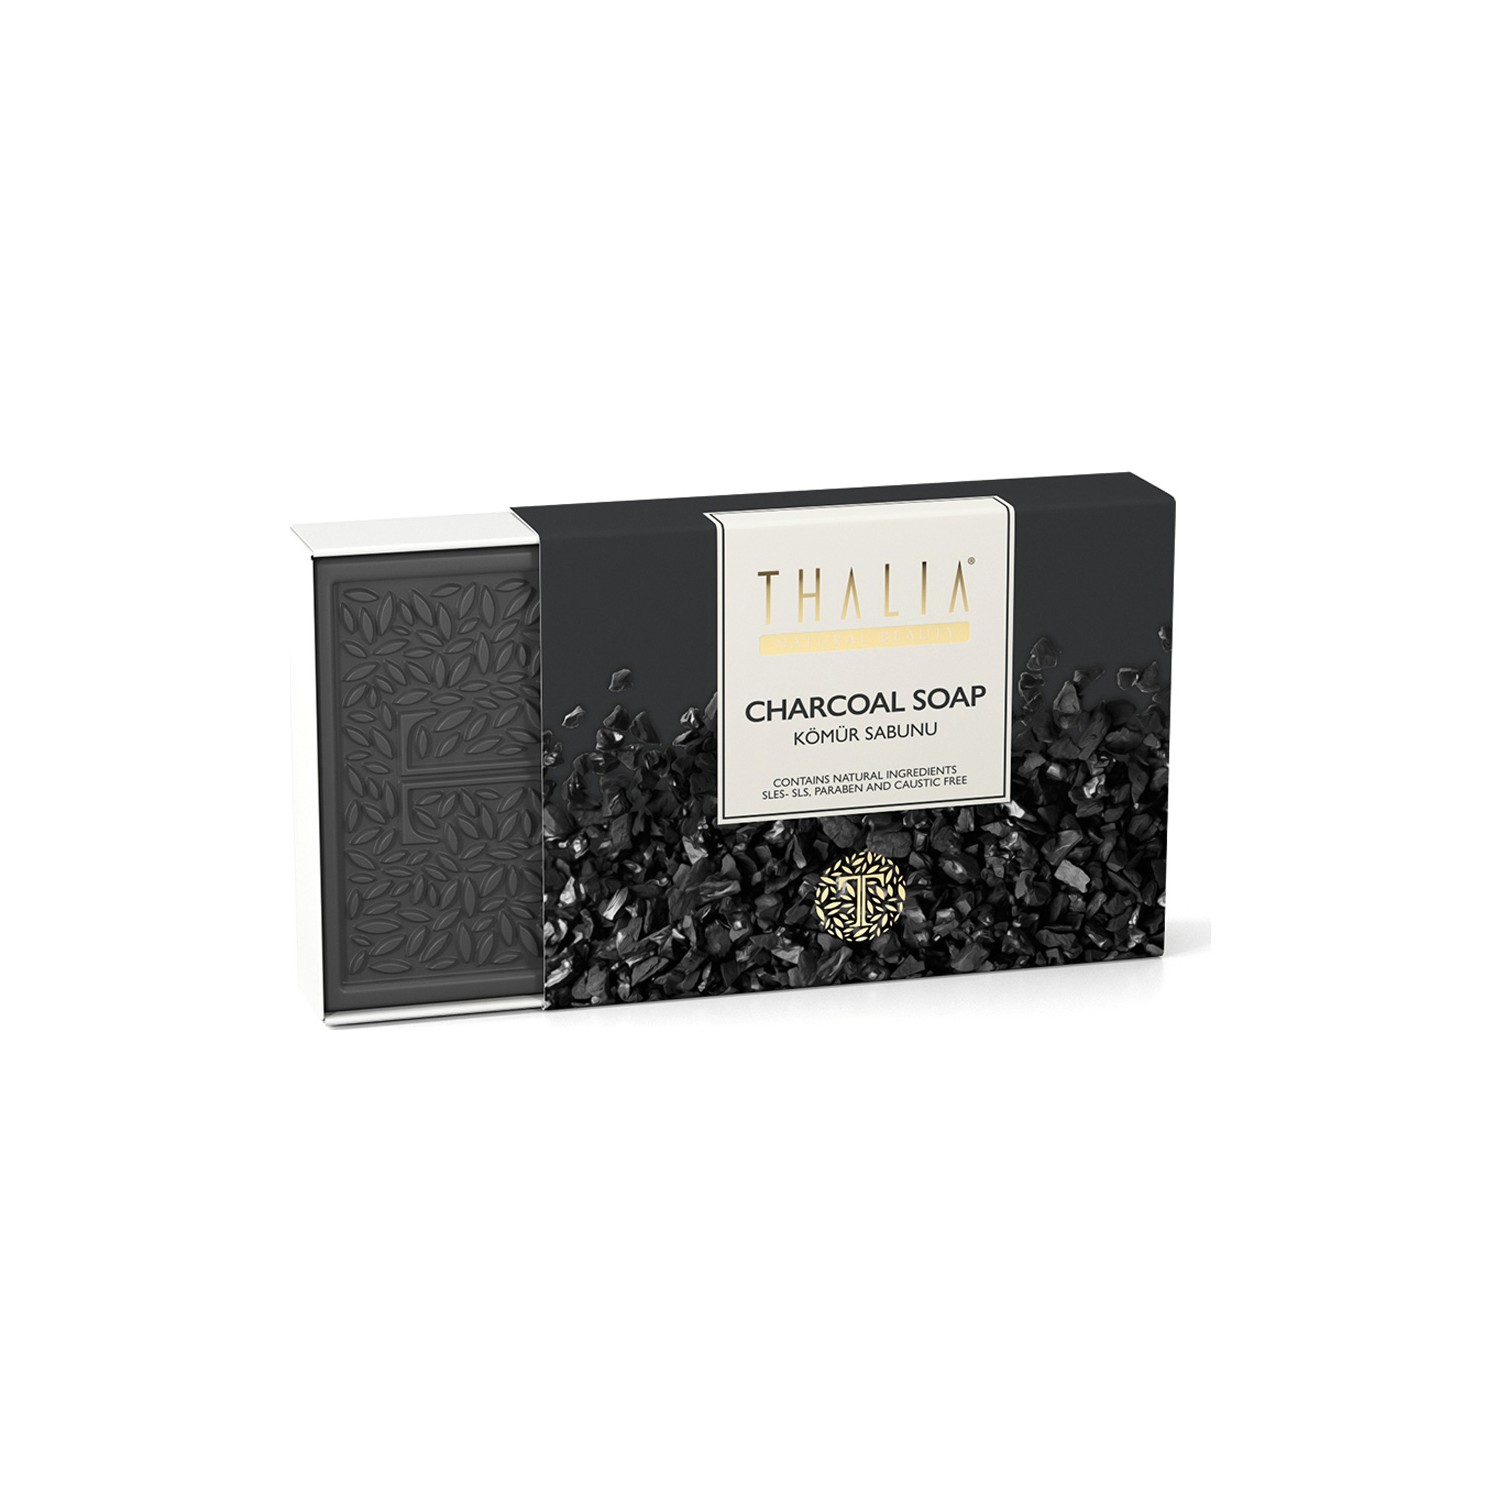 Мыло Thalia Natural Charcoal bamboo charcoal handmade soap 100g natural charcoal soap sea salt in addition to mites oil control goat milk cleansing oil